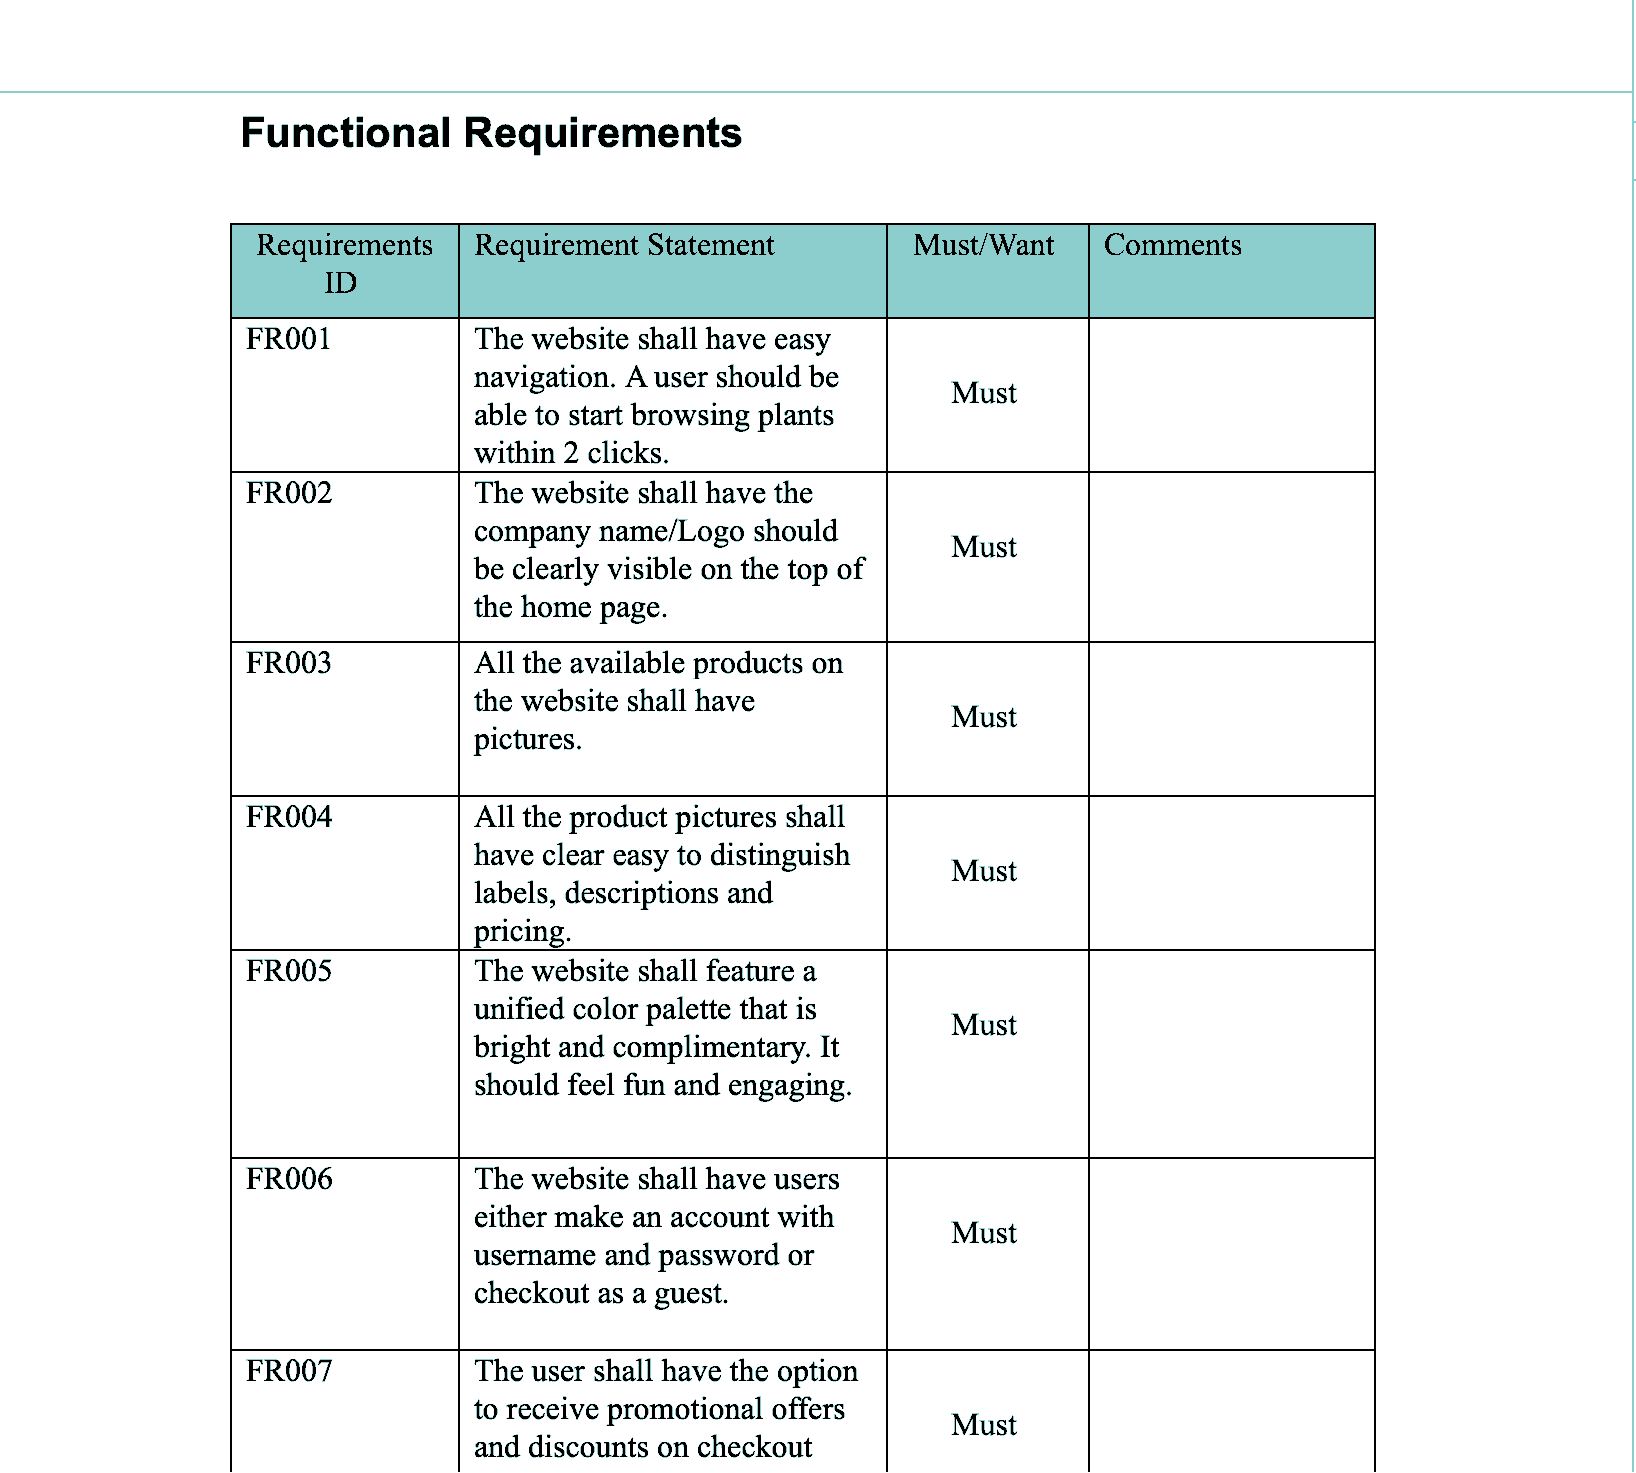 Functional Requirements